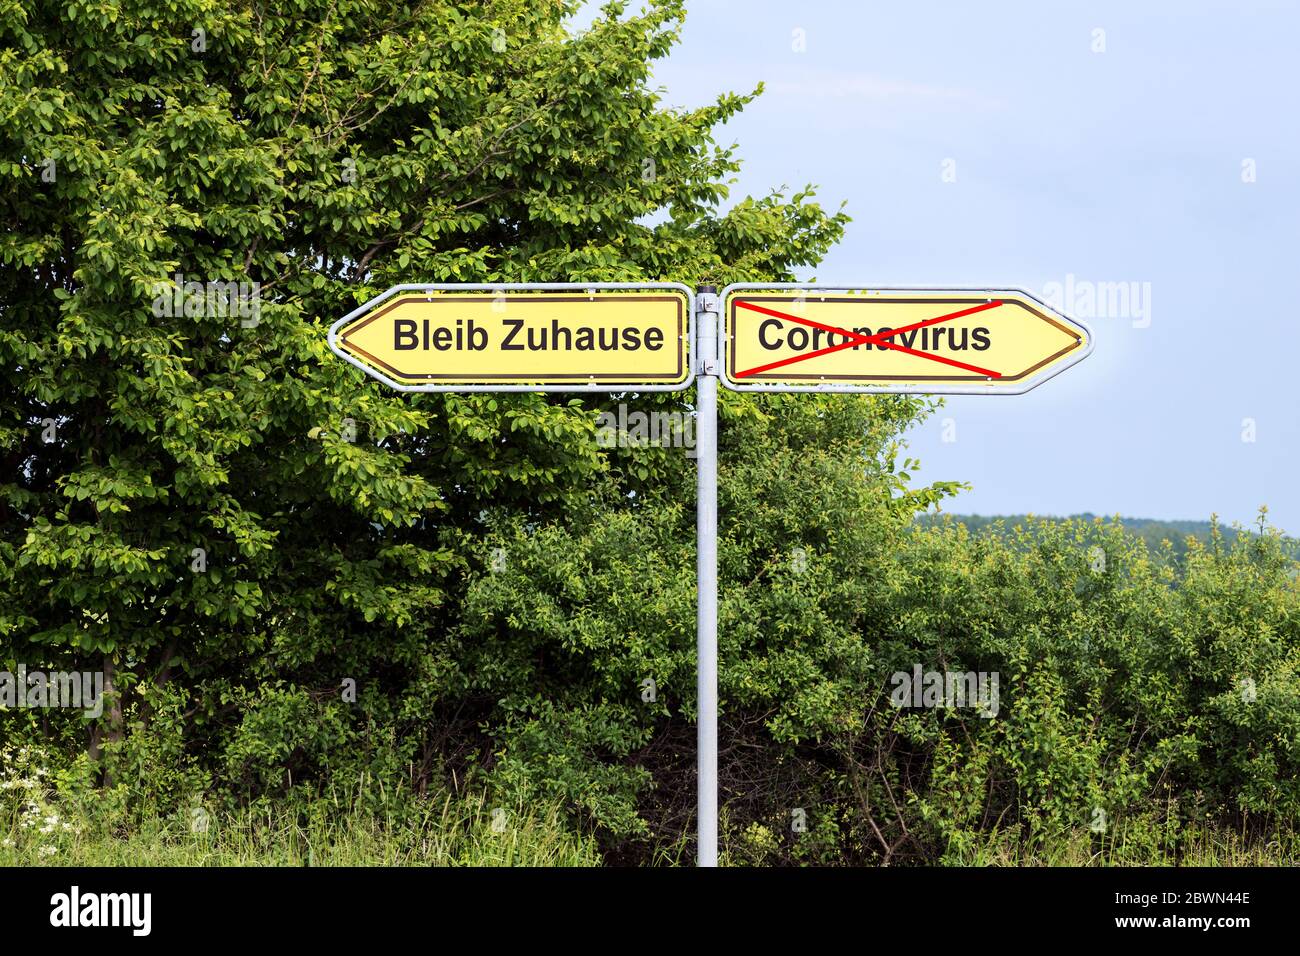 Yellow road signs pointing in opposite directions with German text Bleib Zuhause meaning Stay Home,  and Coronavirus, rural landscape in the backgroun Stock Photo